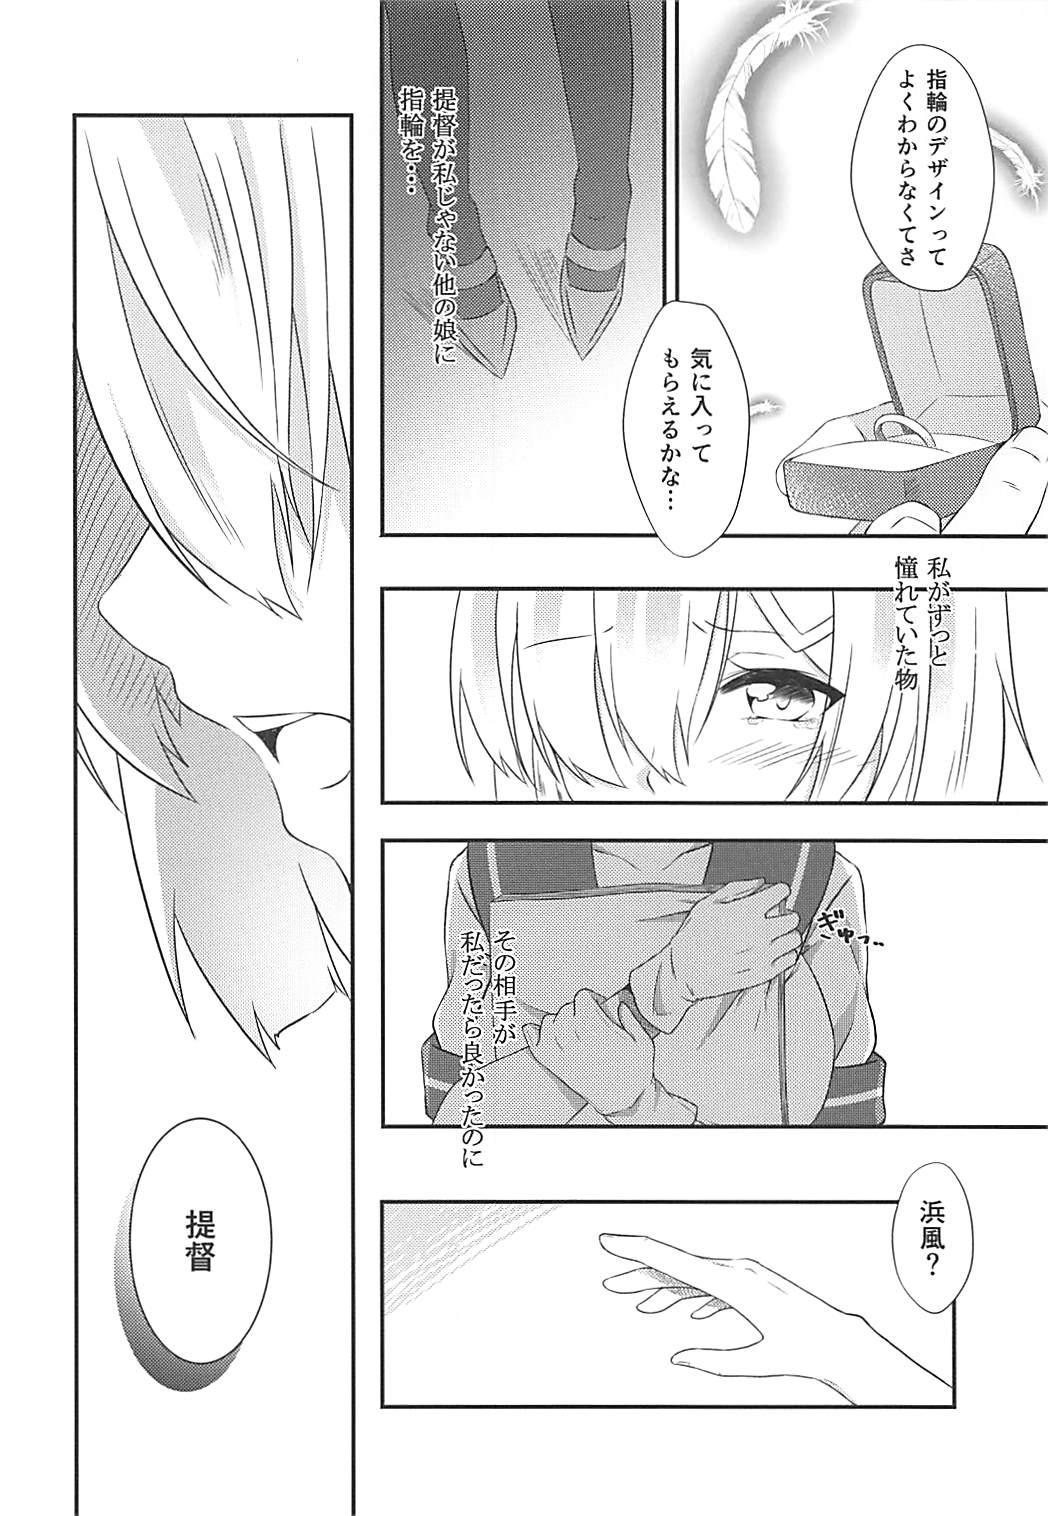 Spycam a happy ending - Kantai collection Peru - Page 5